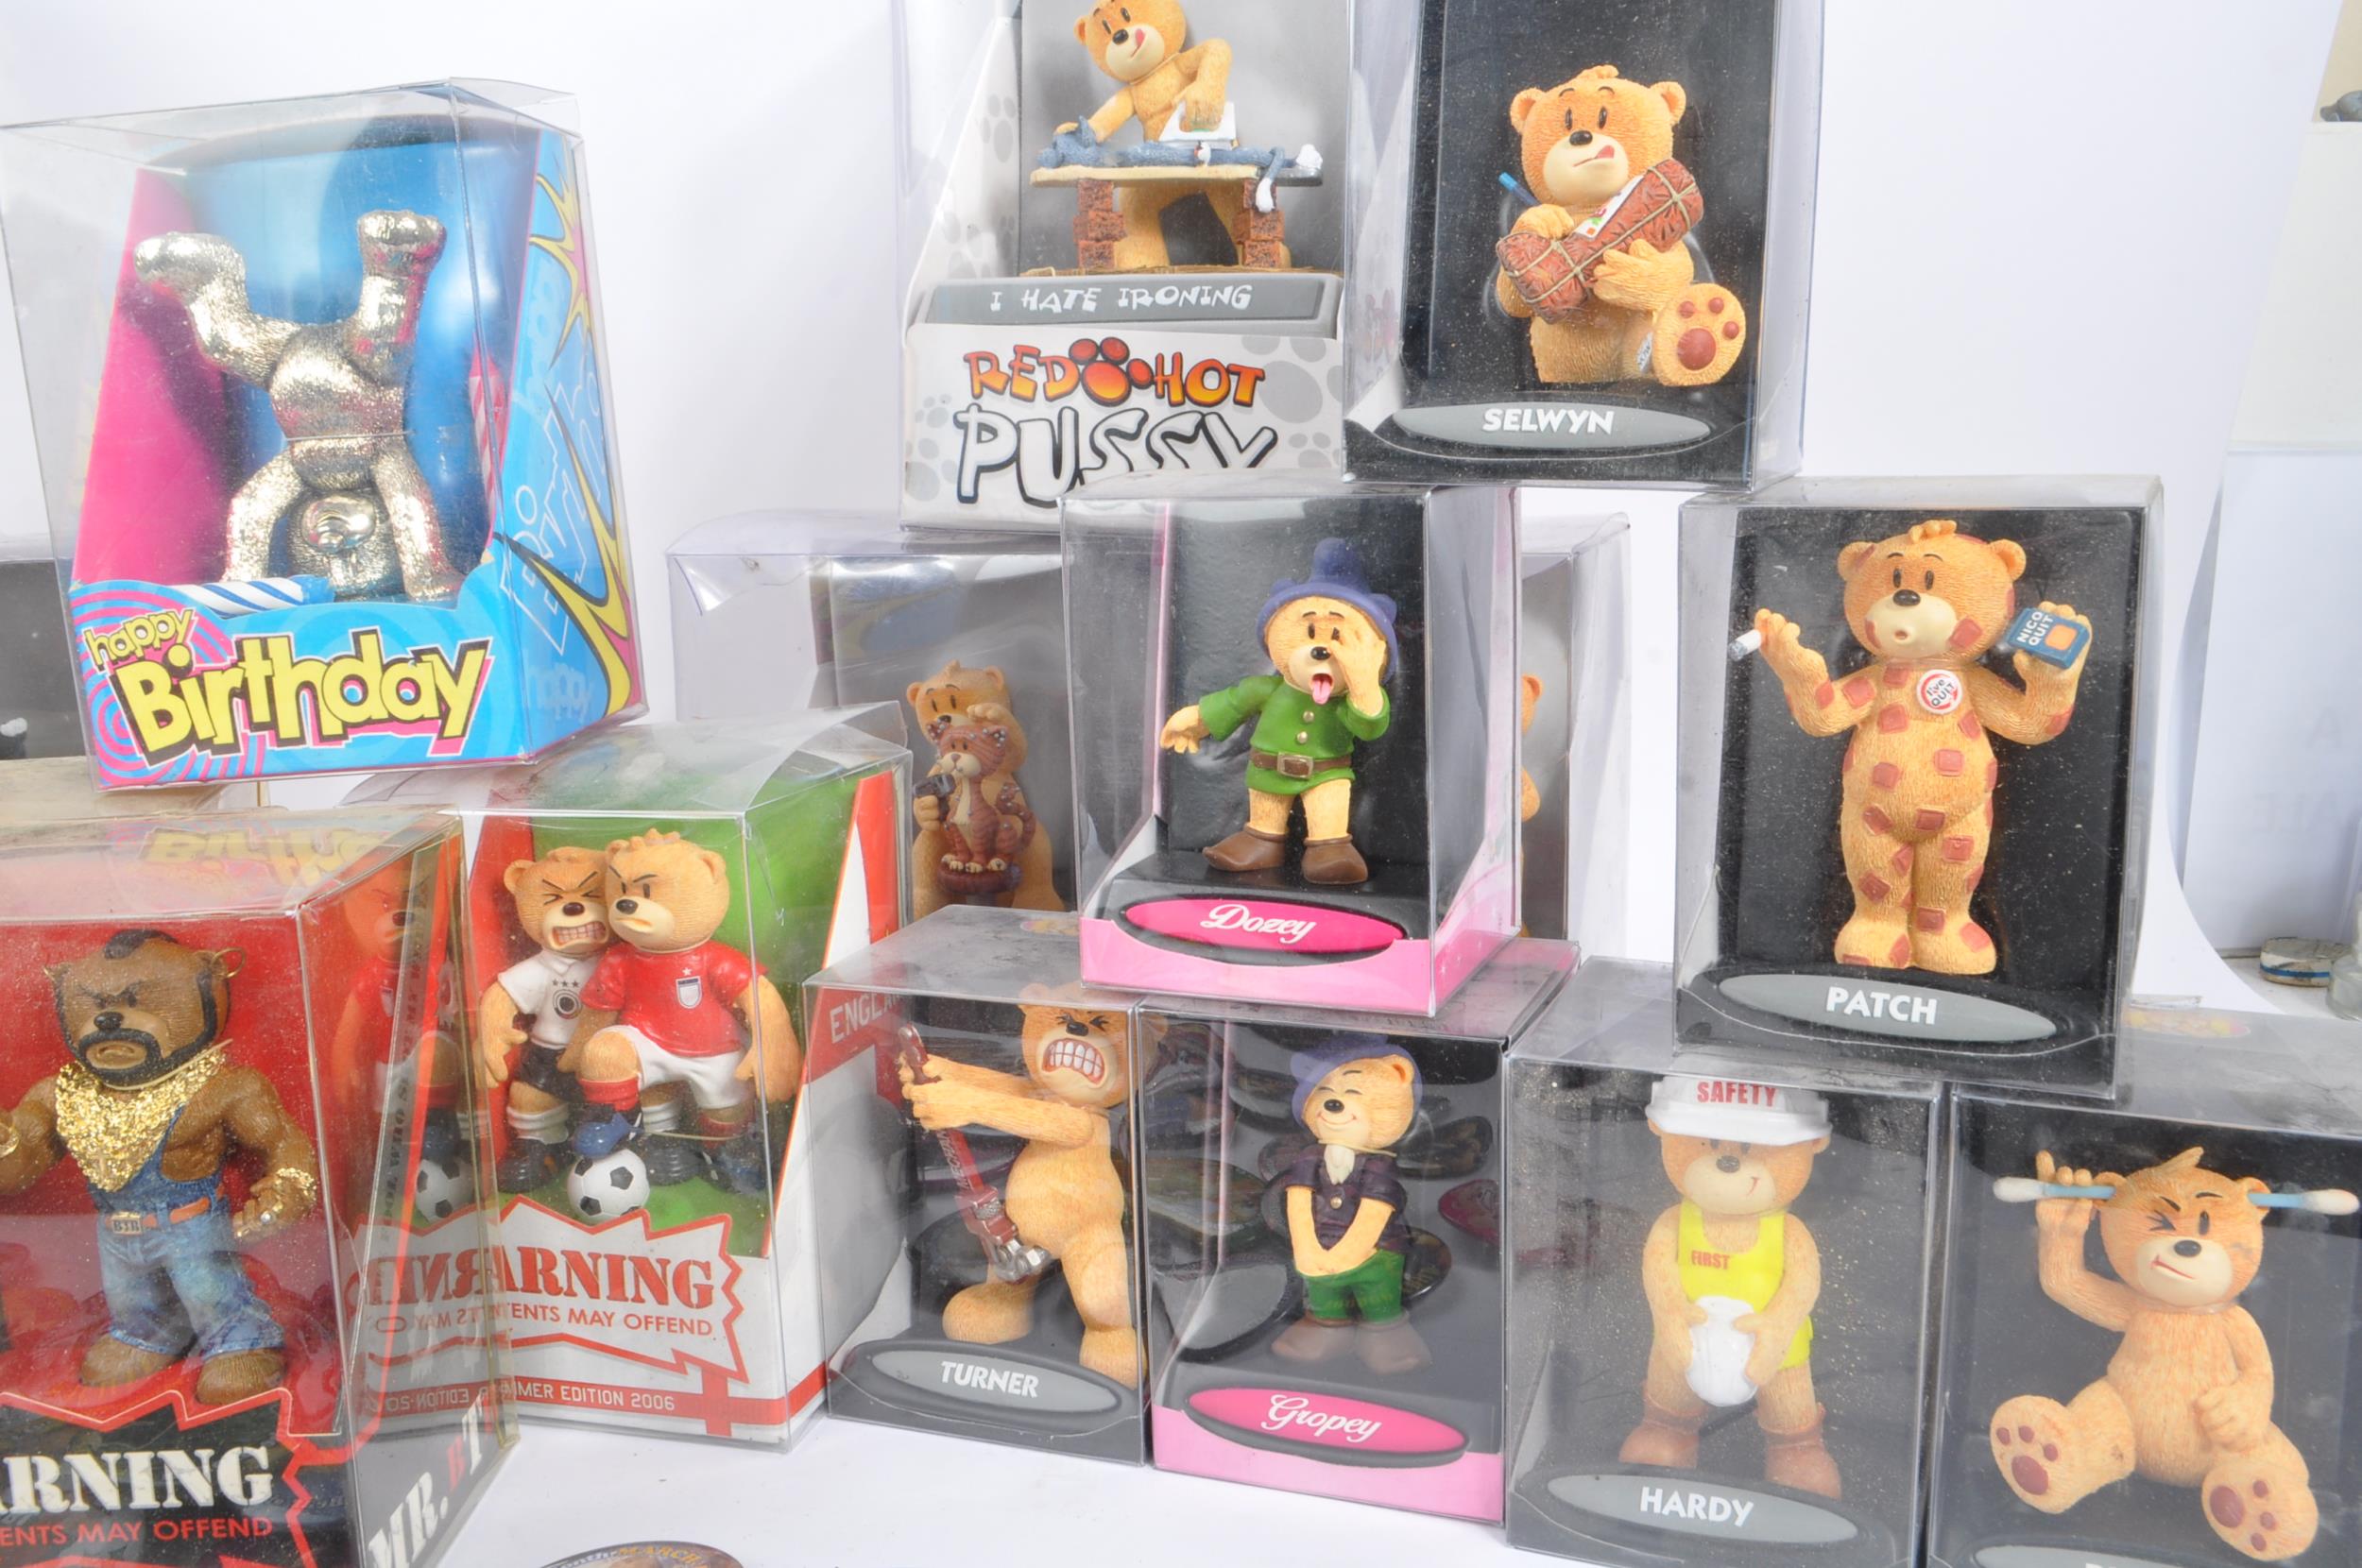 COLLECTION OF BOXED BAD TASTE BEARS FIGURES - Image 5 of 11